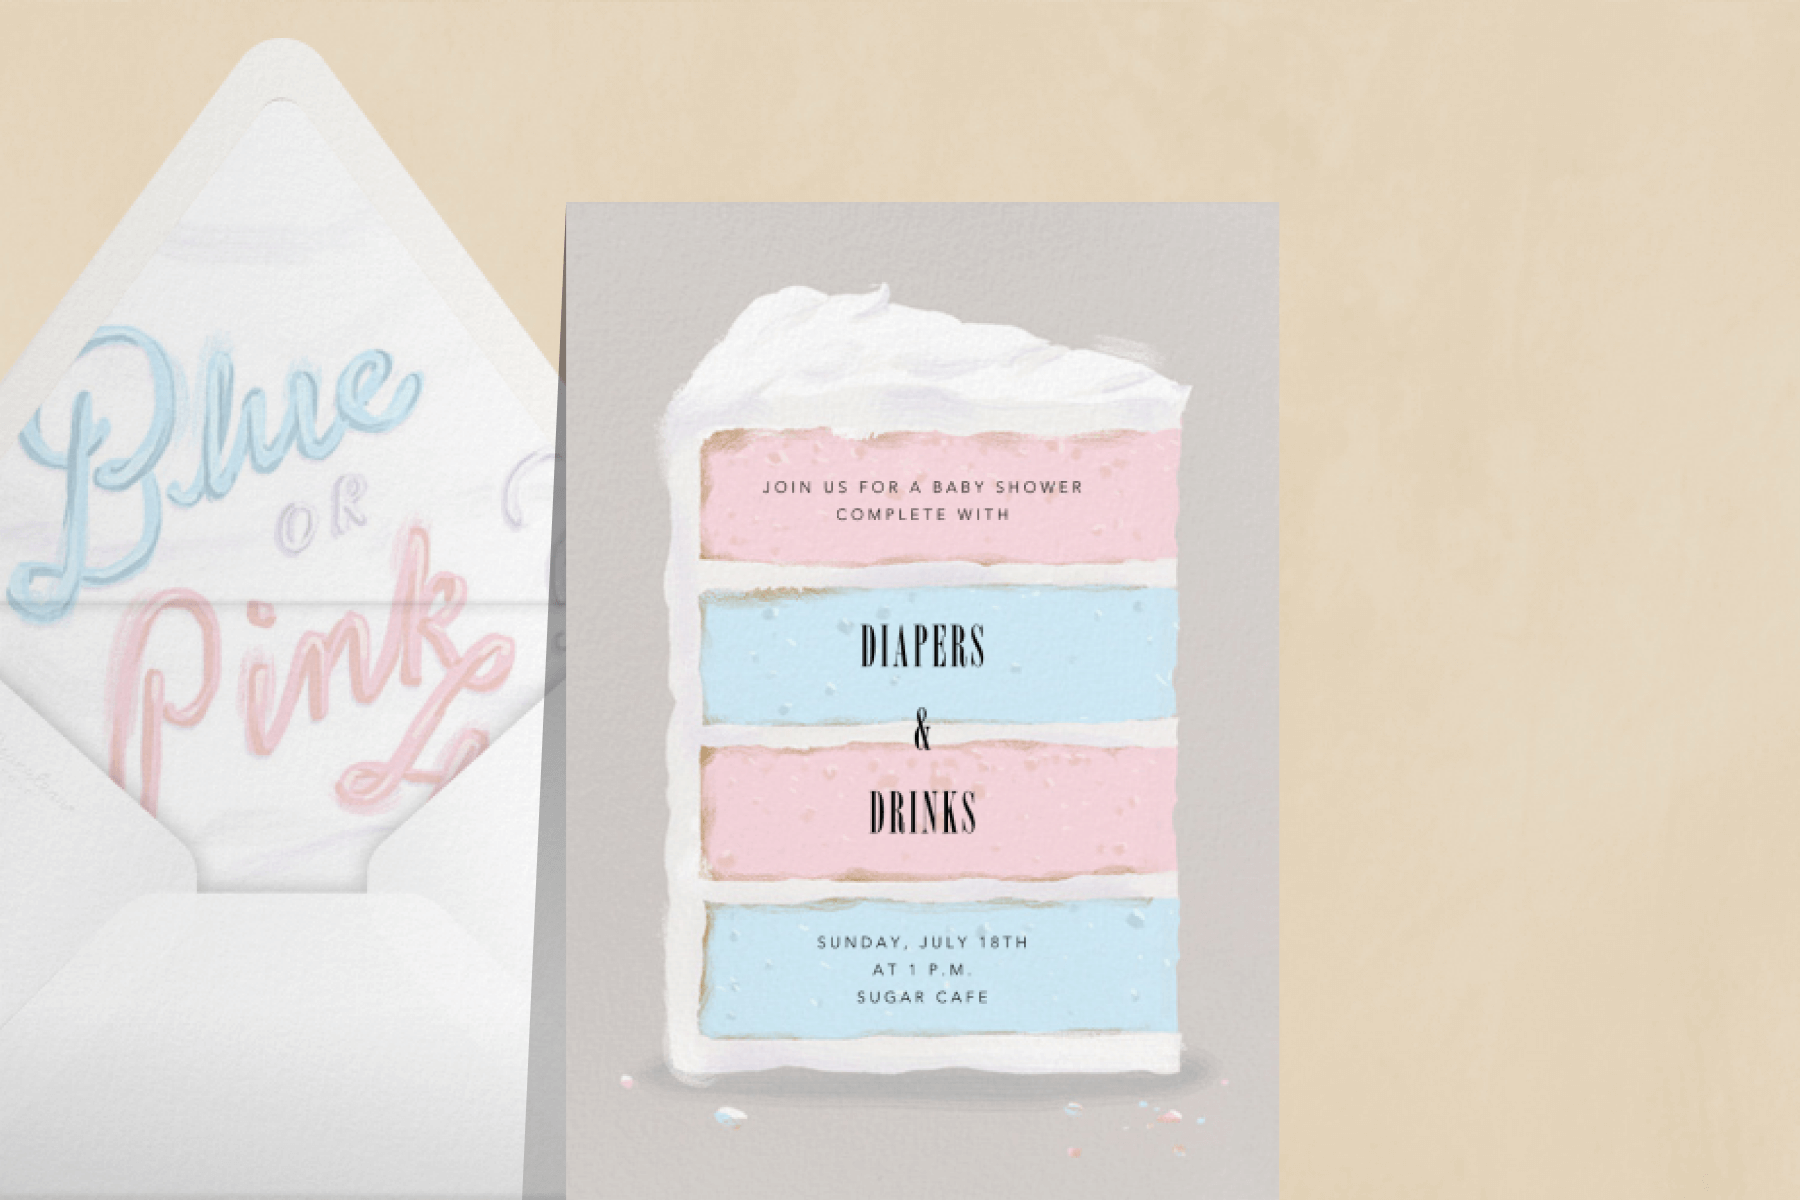 A baby shower invitation featuring a pink and blue layered cake.